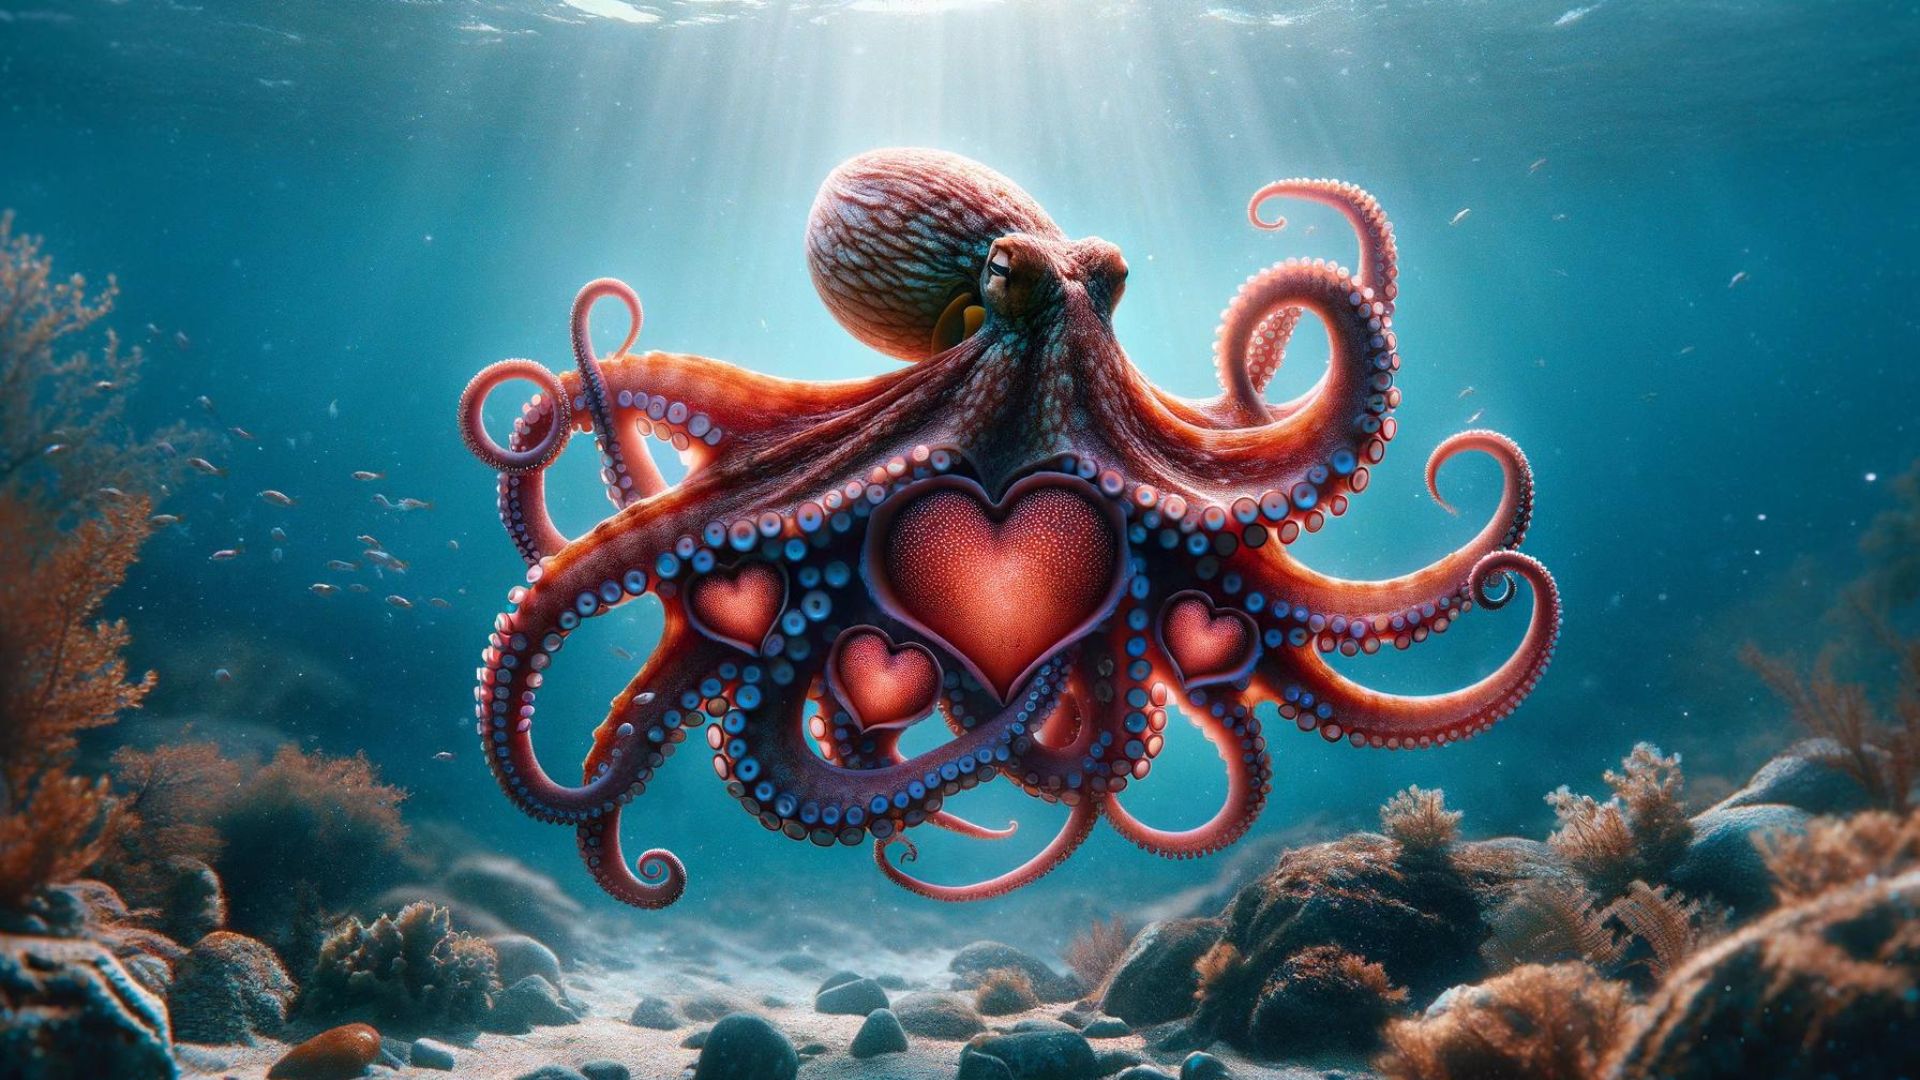 Did you know that octopuses have three hearts